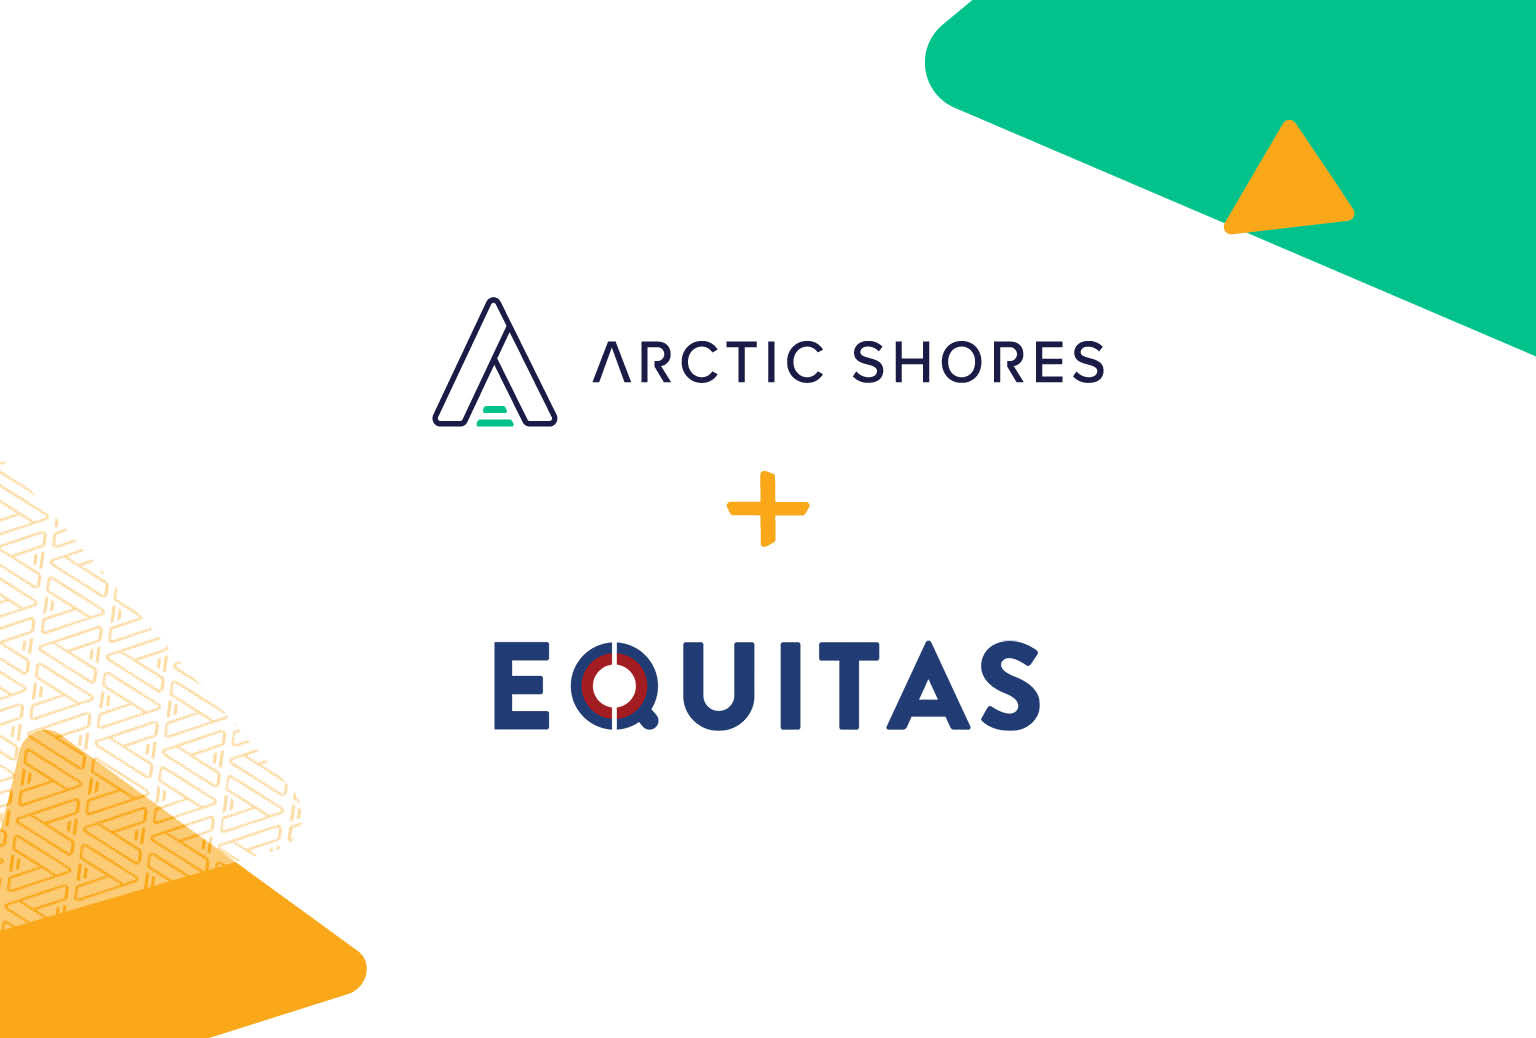 Arctic Shores & Equitas join forces in the fight for fairness